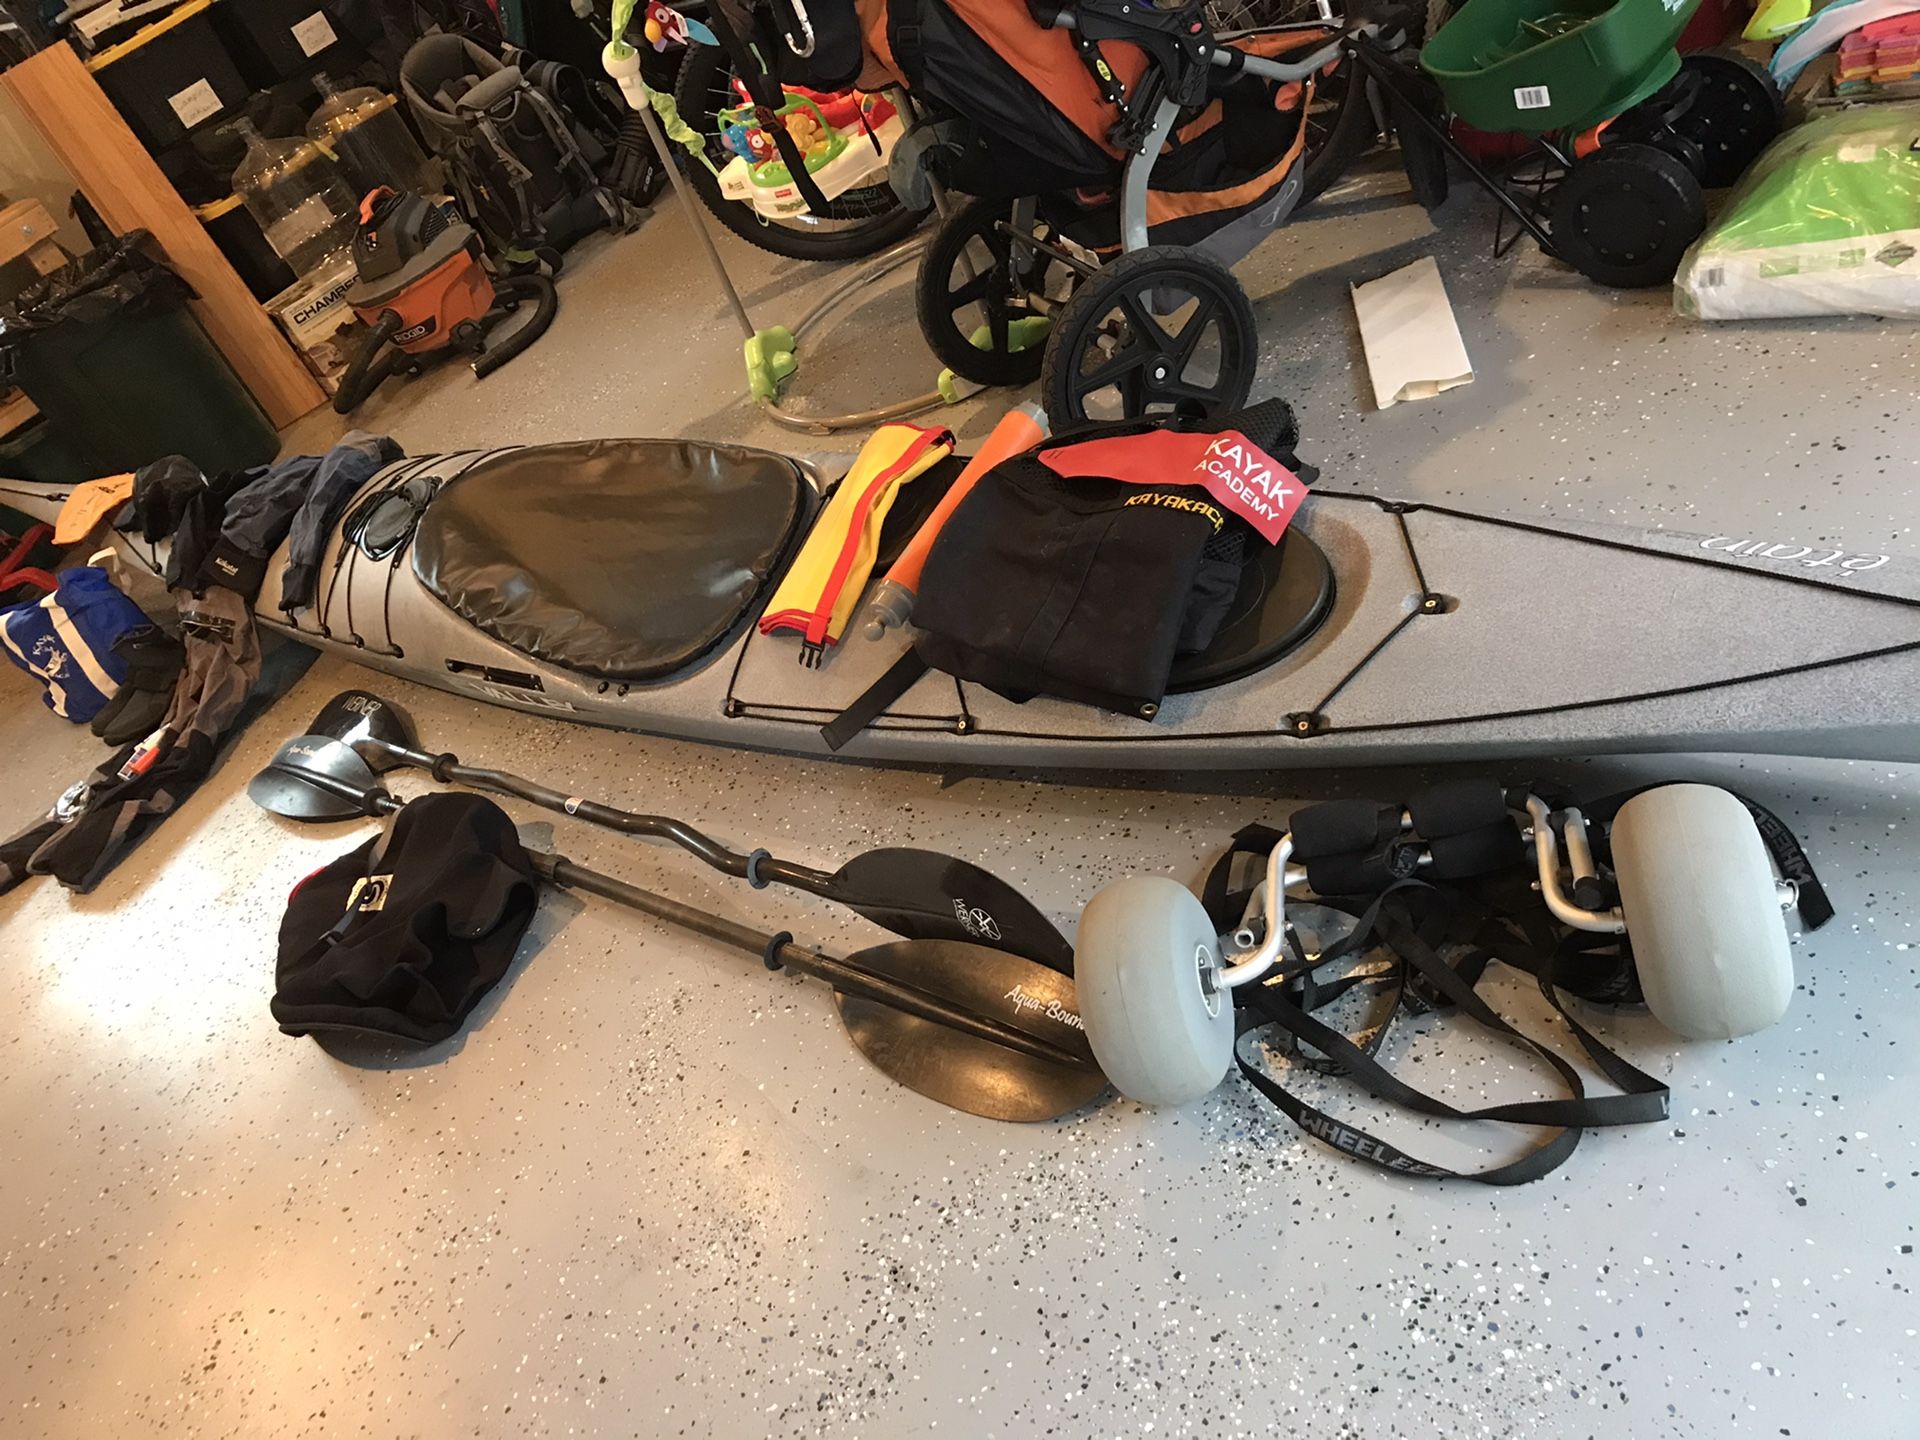 Valley Etain 17.5” 2014 model with full set of kayak gear